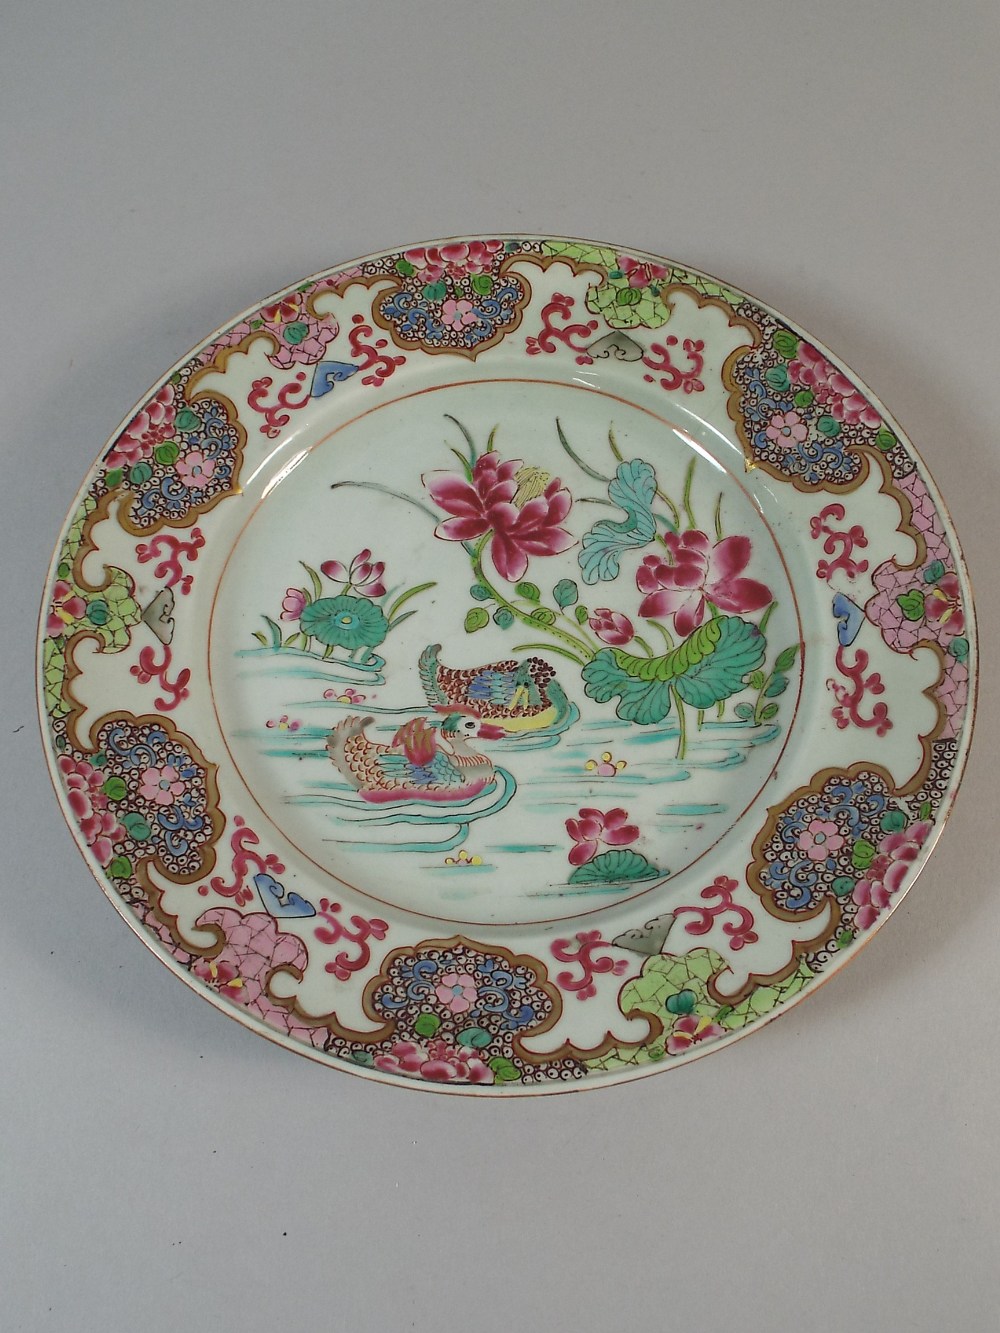 An Early Chinese Famille Rose Plate depicting Ducks in Polychrome Enamel and with Gilt Highlights